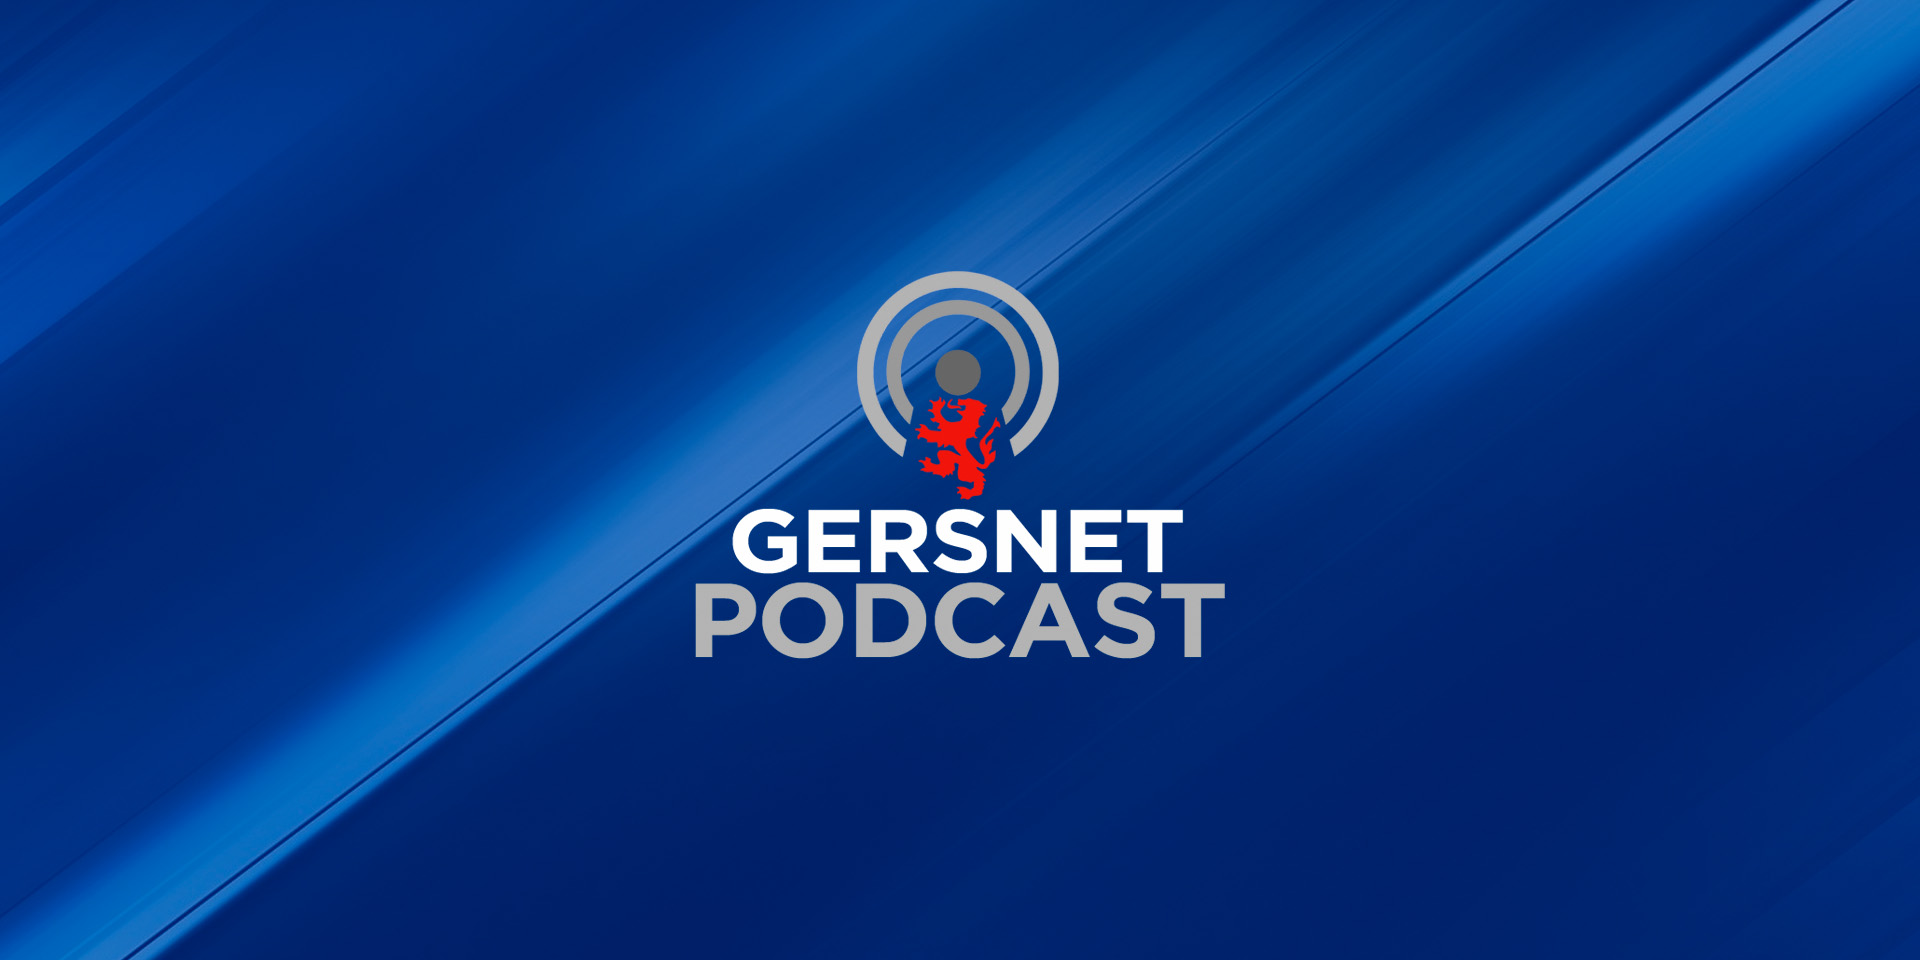 Gersnet Podcast 329 - Scottish Cup Semi Preview